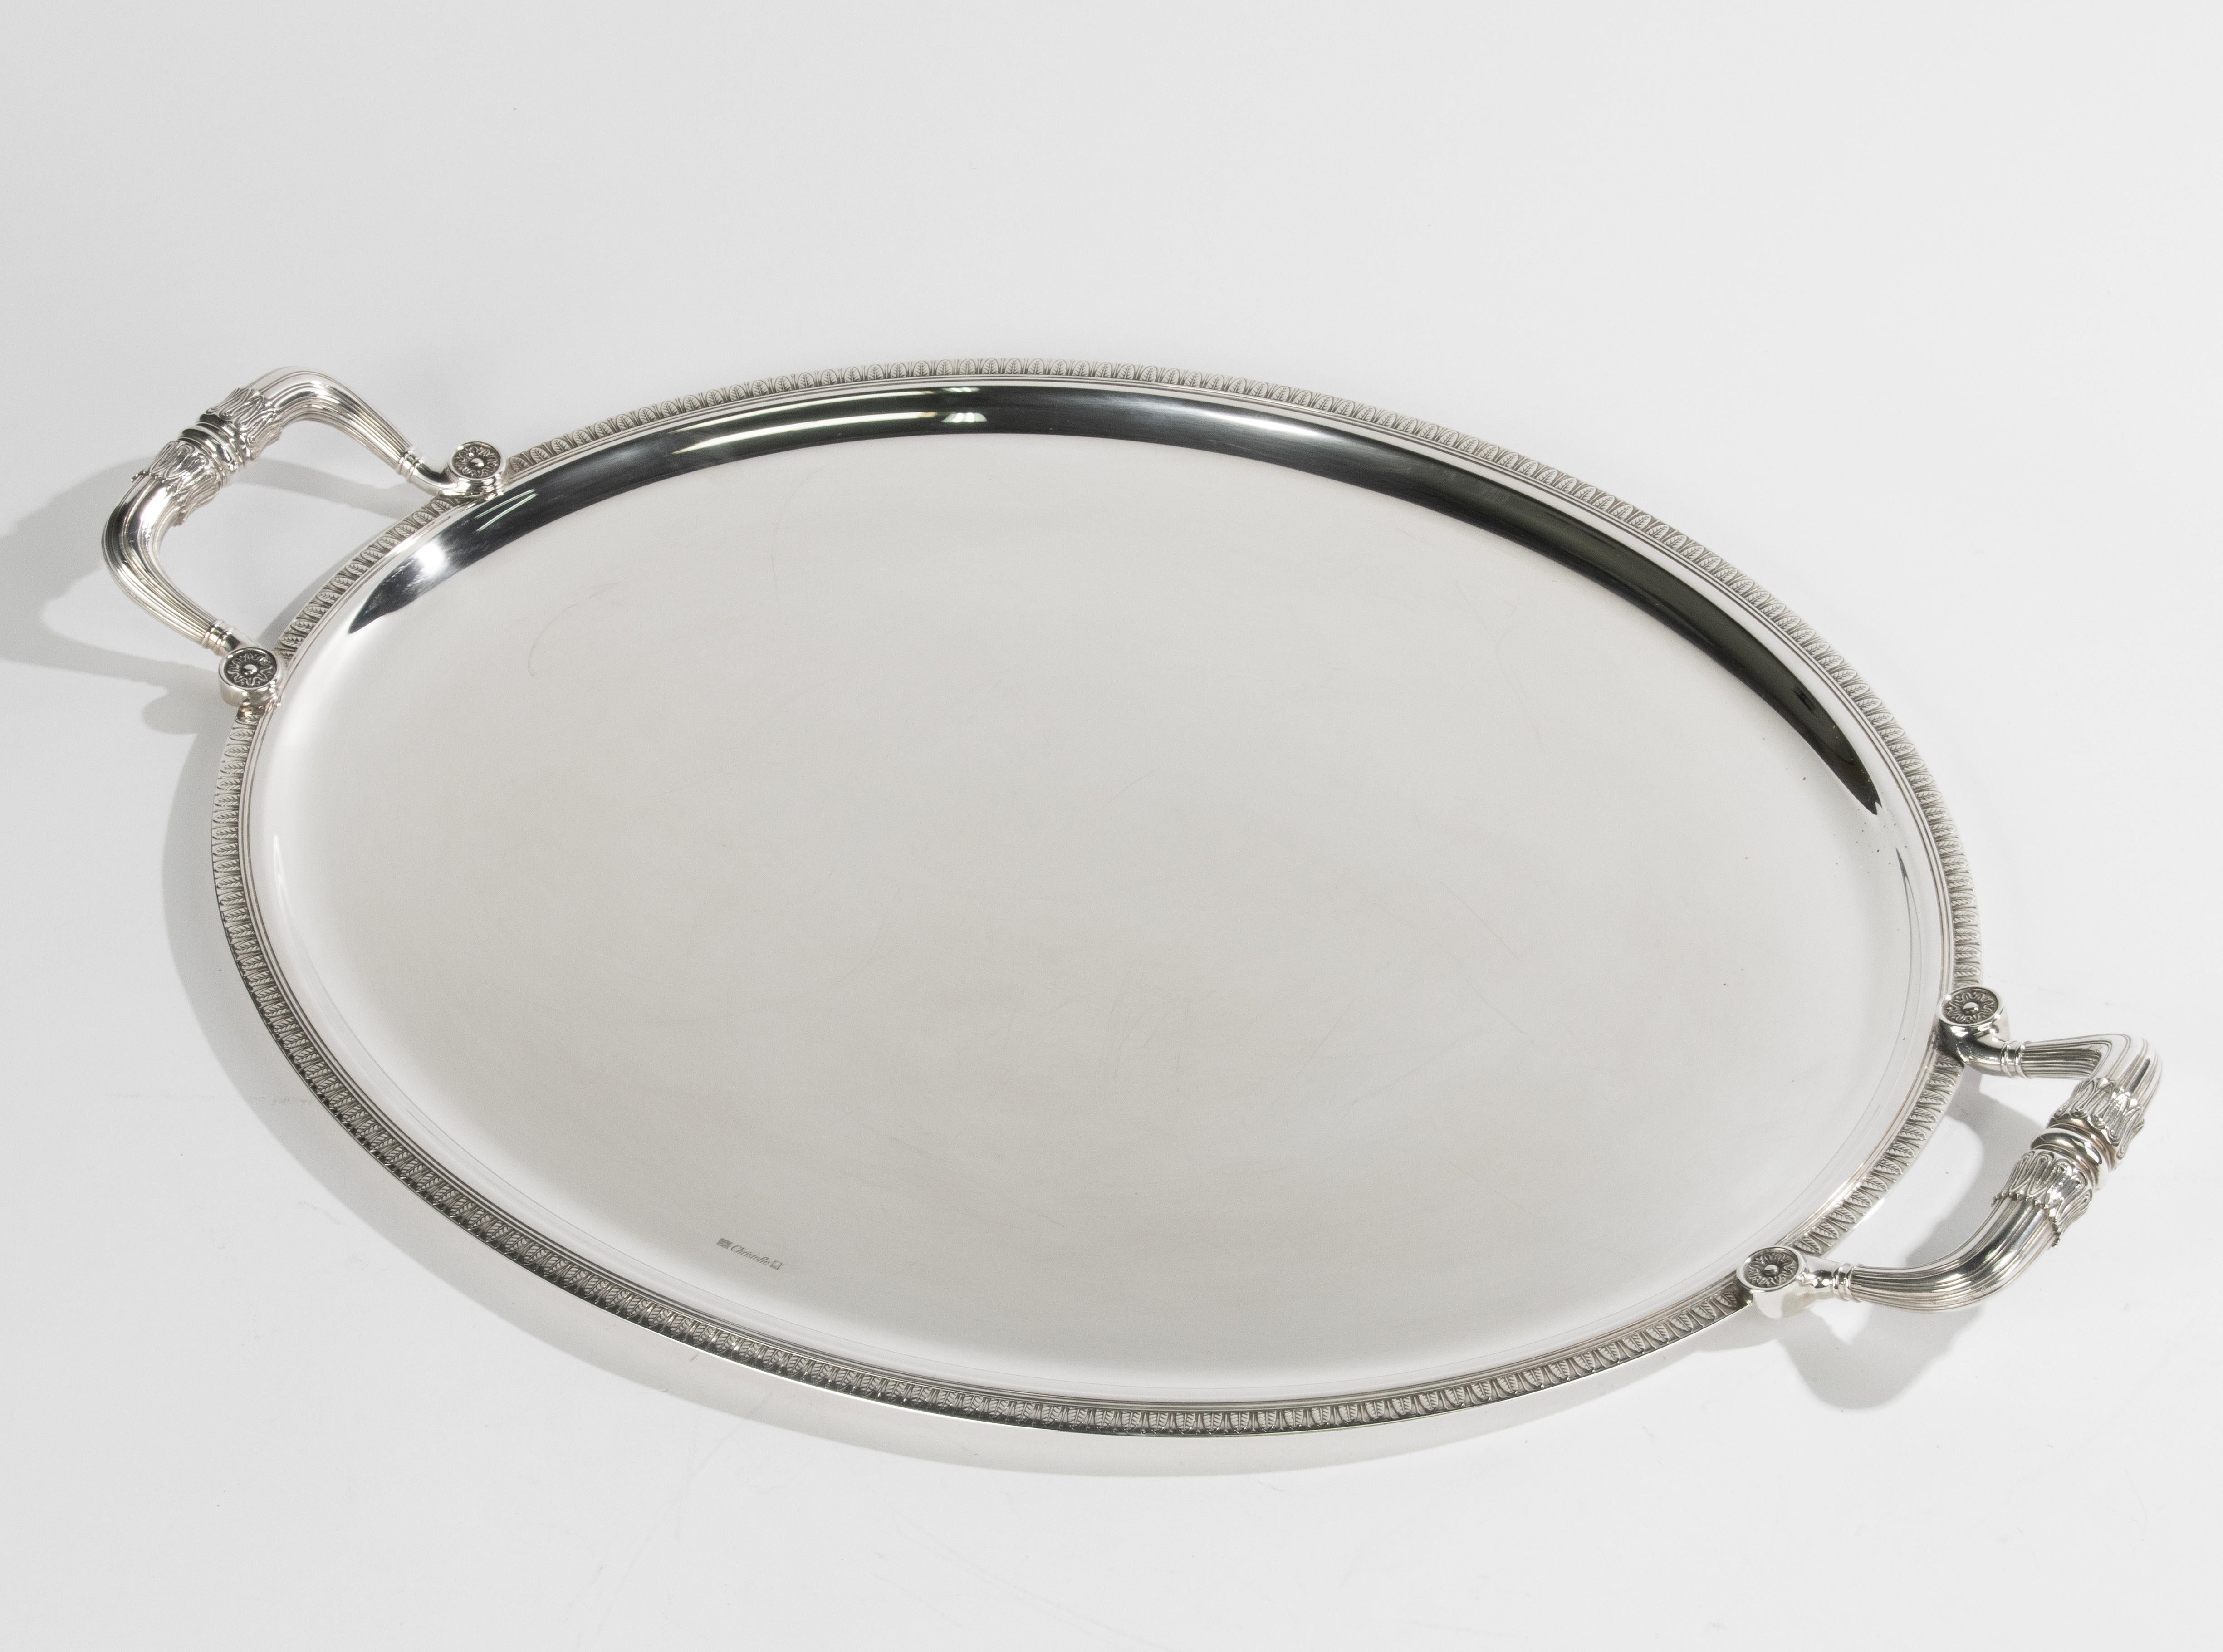 A beautiful large silver-plated tray, from the French brand Christofle.
The name of the model is Malmaison.
The tray is in incredibly beautiful condition, it looks as if it has hardly been used. Beautiful color and shine.
This is a large size: 63.5